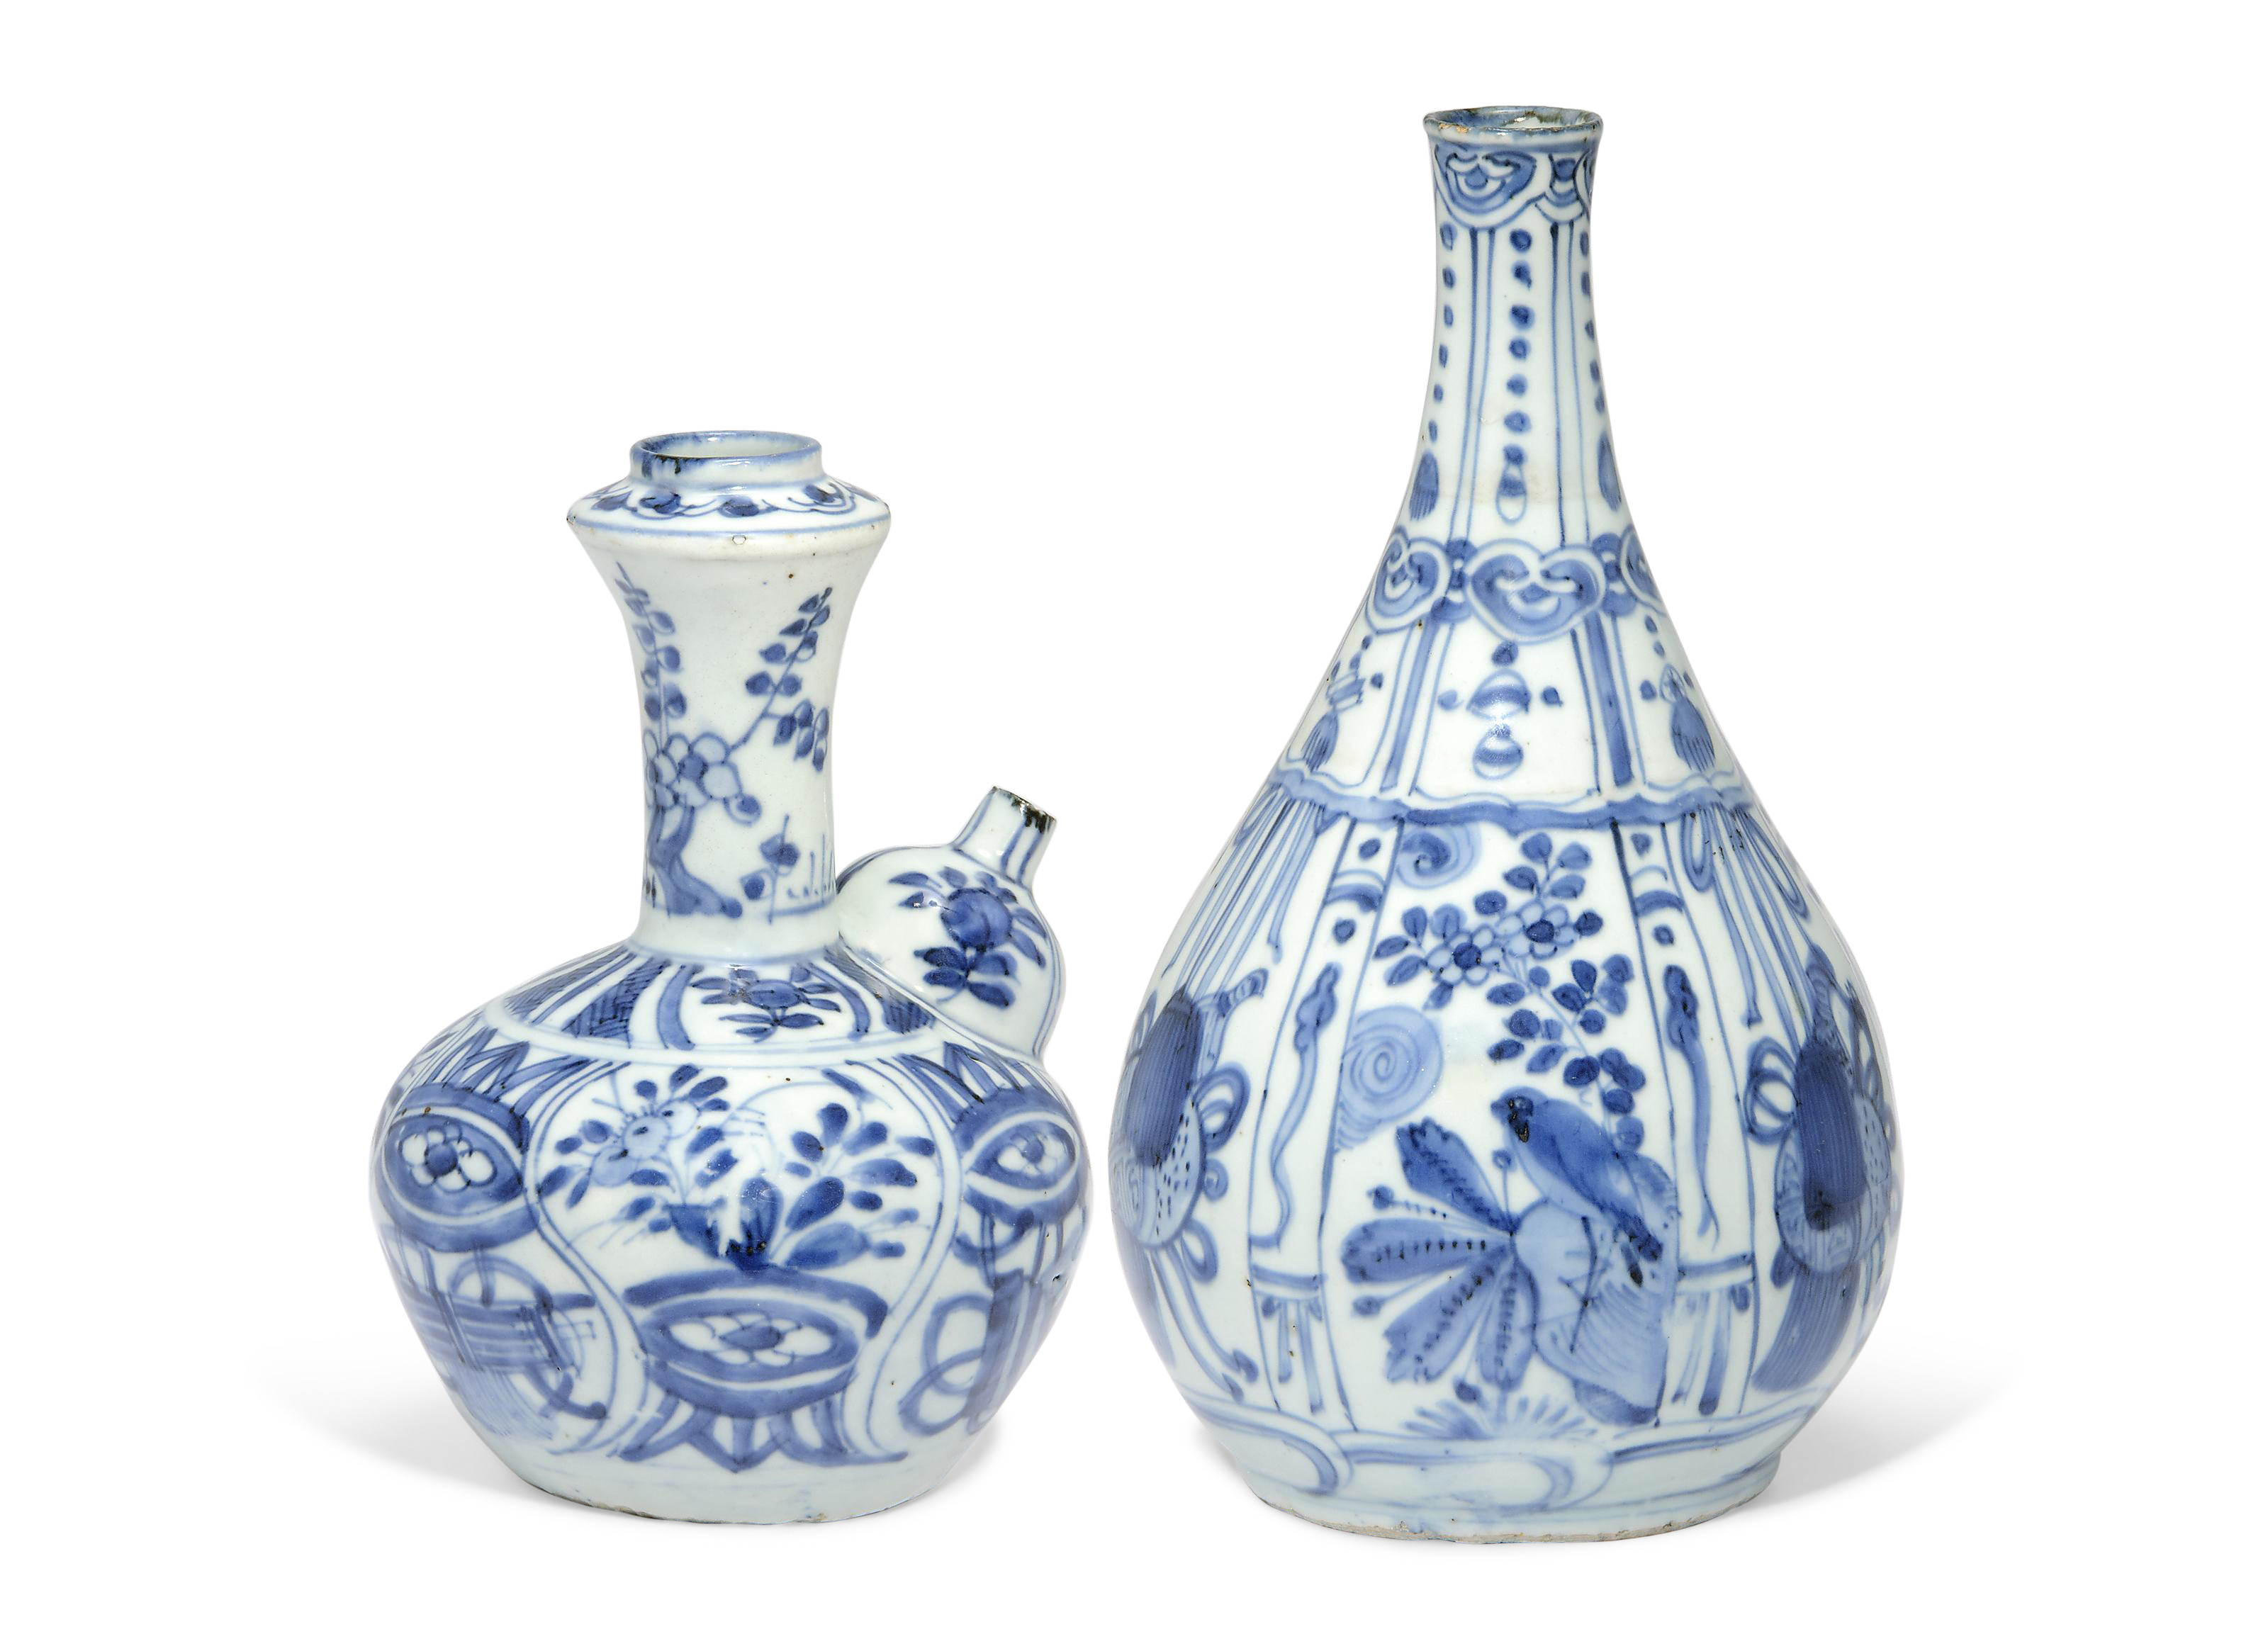 10 Trendy Blue and White Porcelain Vase 2024 free download blue and white porcelain vase of a blue and white kendi and a bottle vase wanli period 1573 1619 regarding a blue and white kendi and a bottle vase wanli period 1573 1619 christies